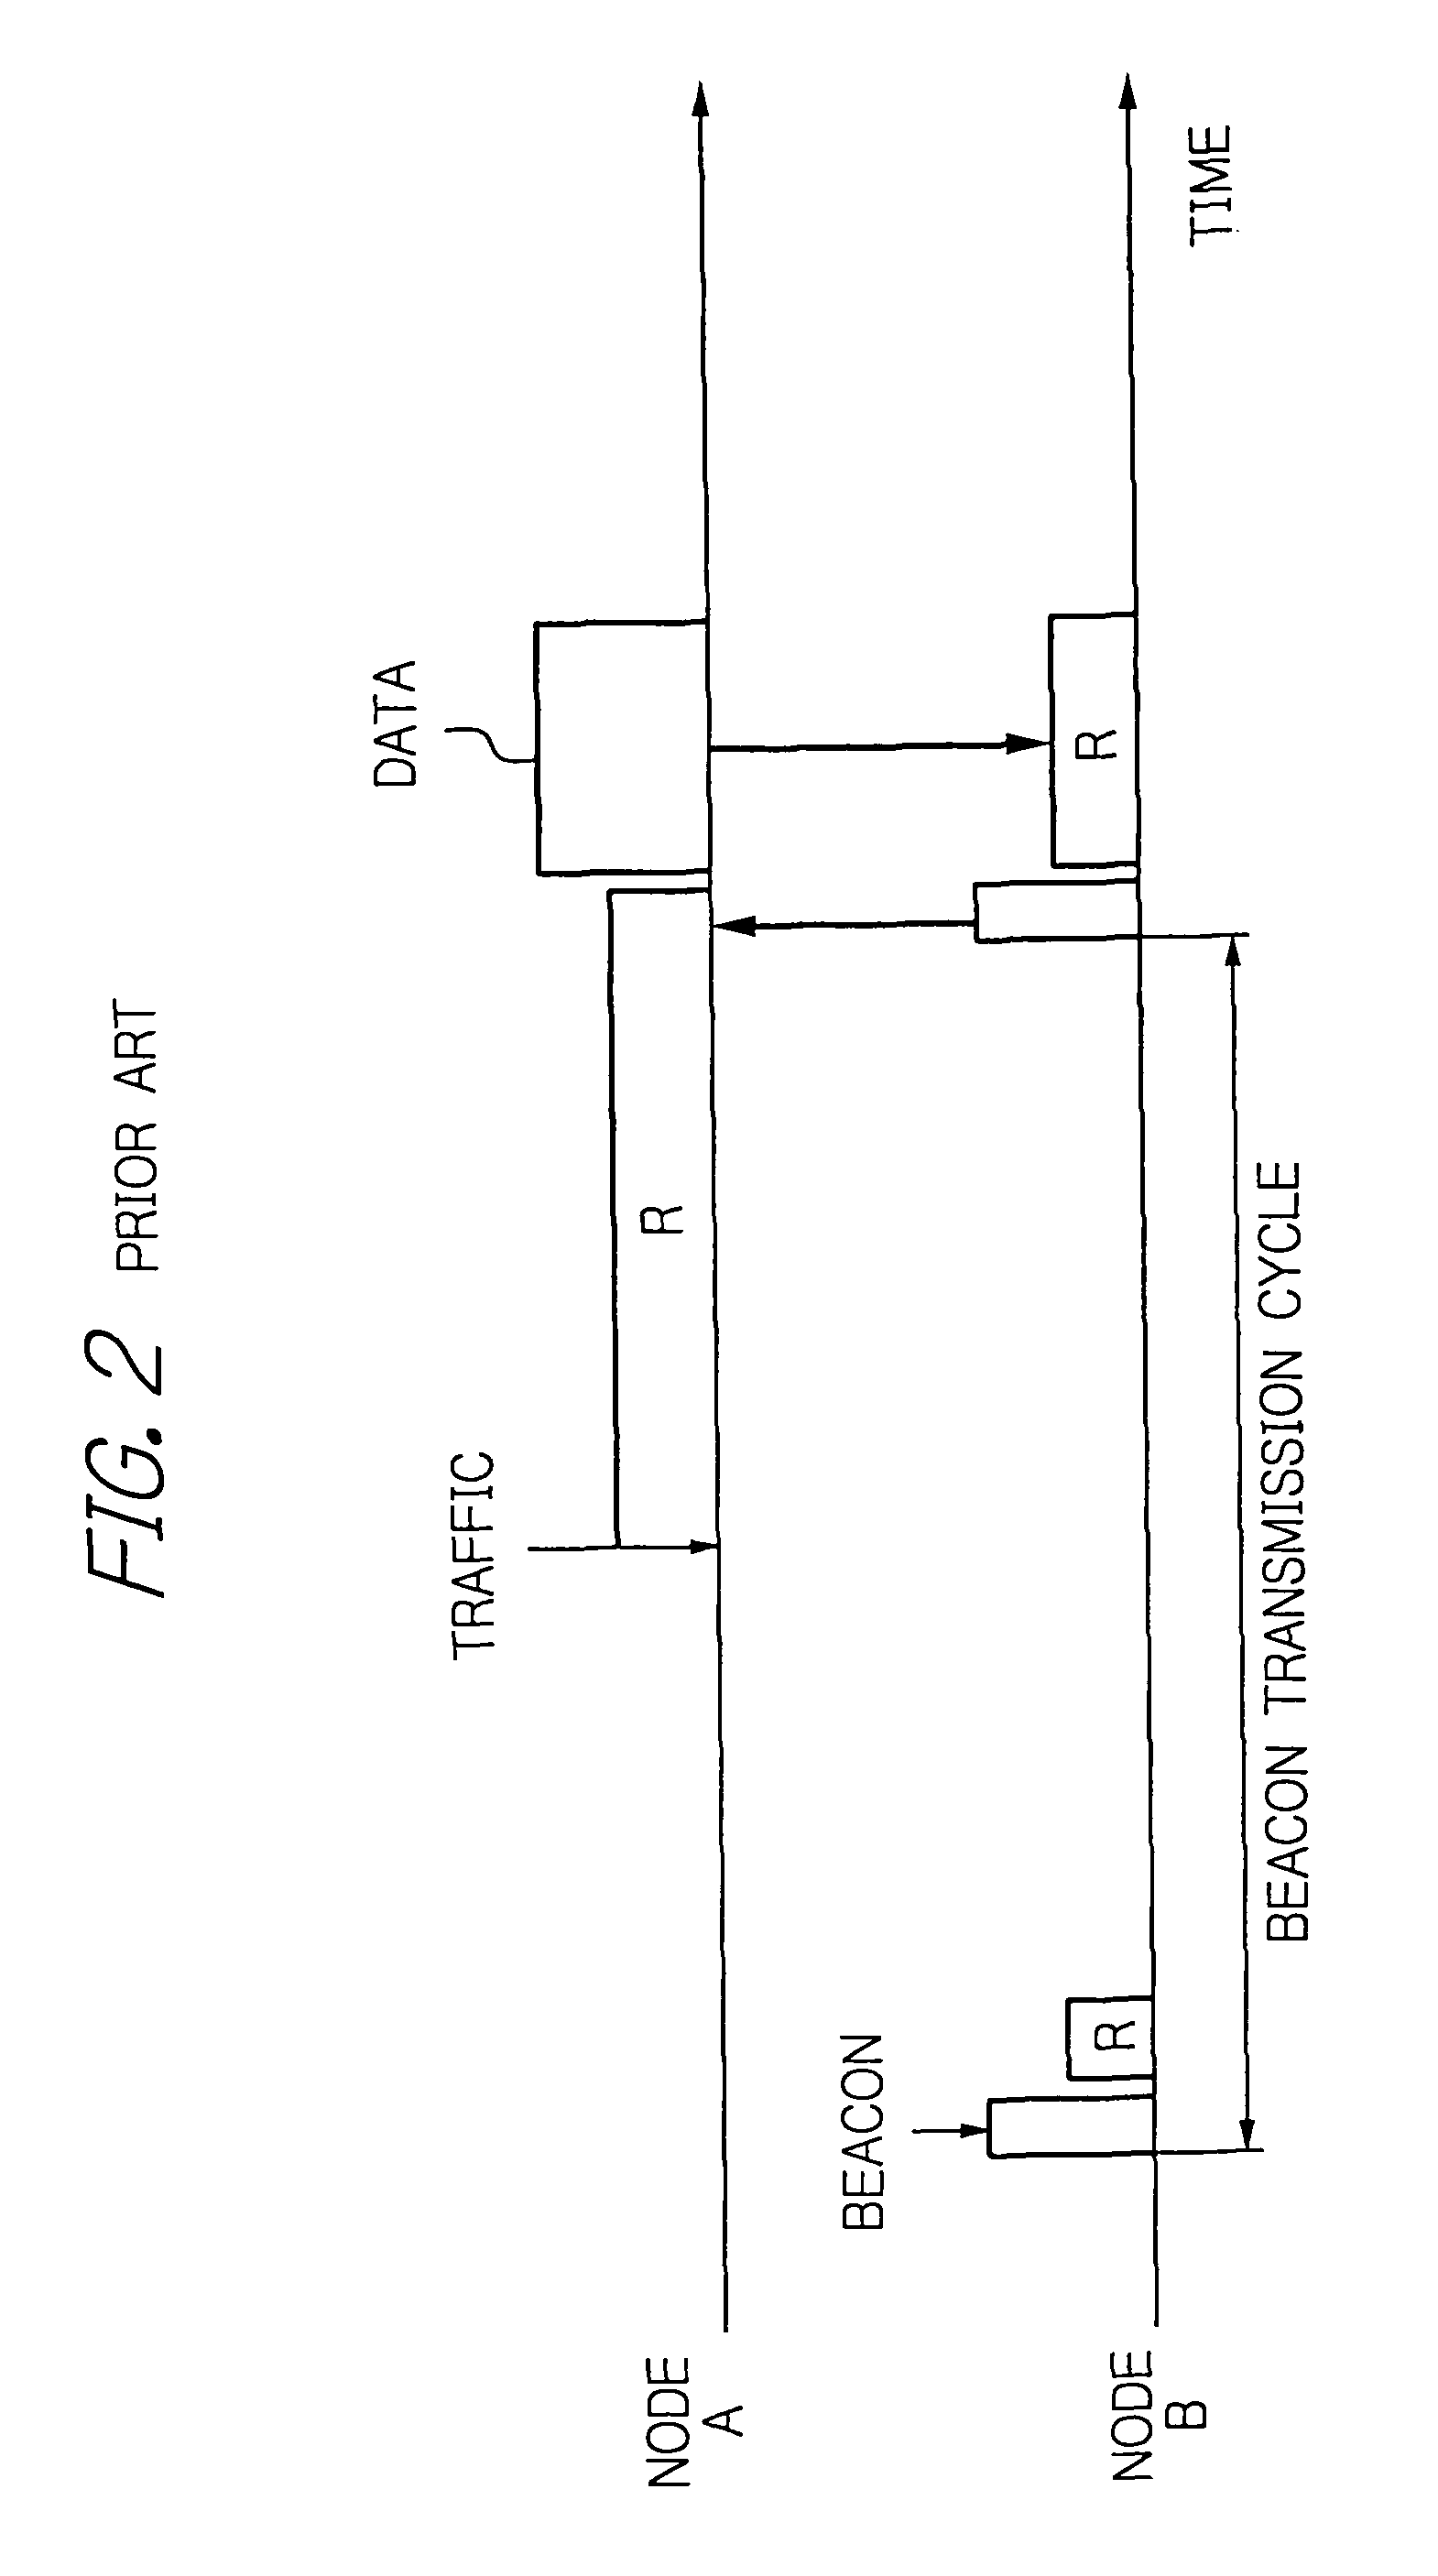 Intermittent operation communication device and communication system using beacon and sleep mode